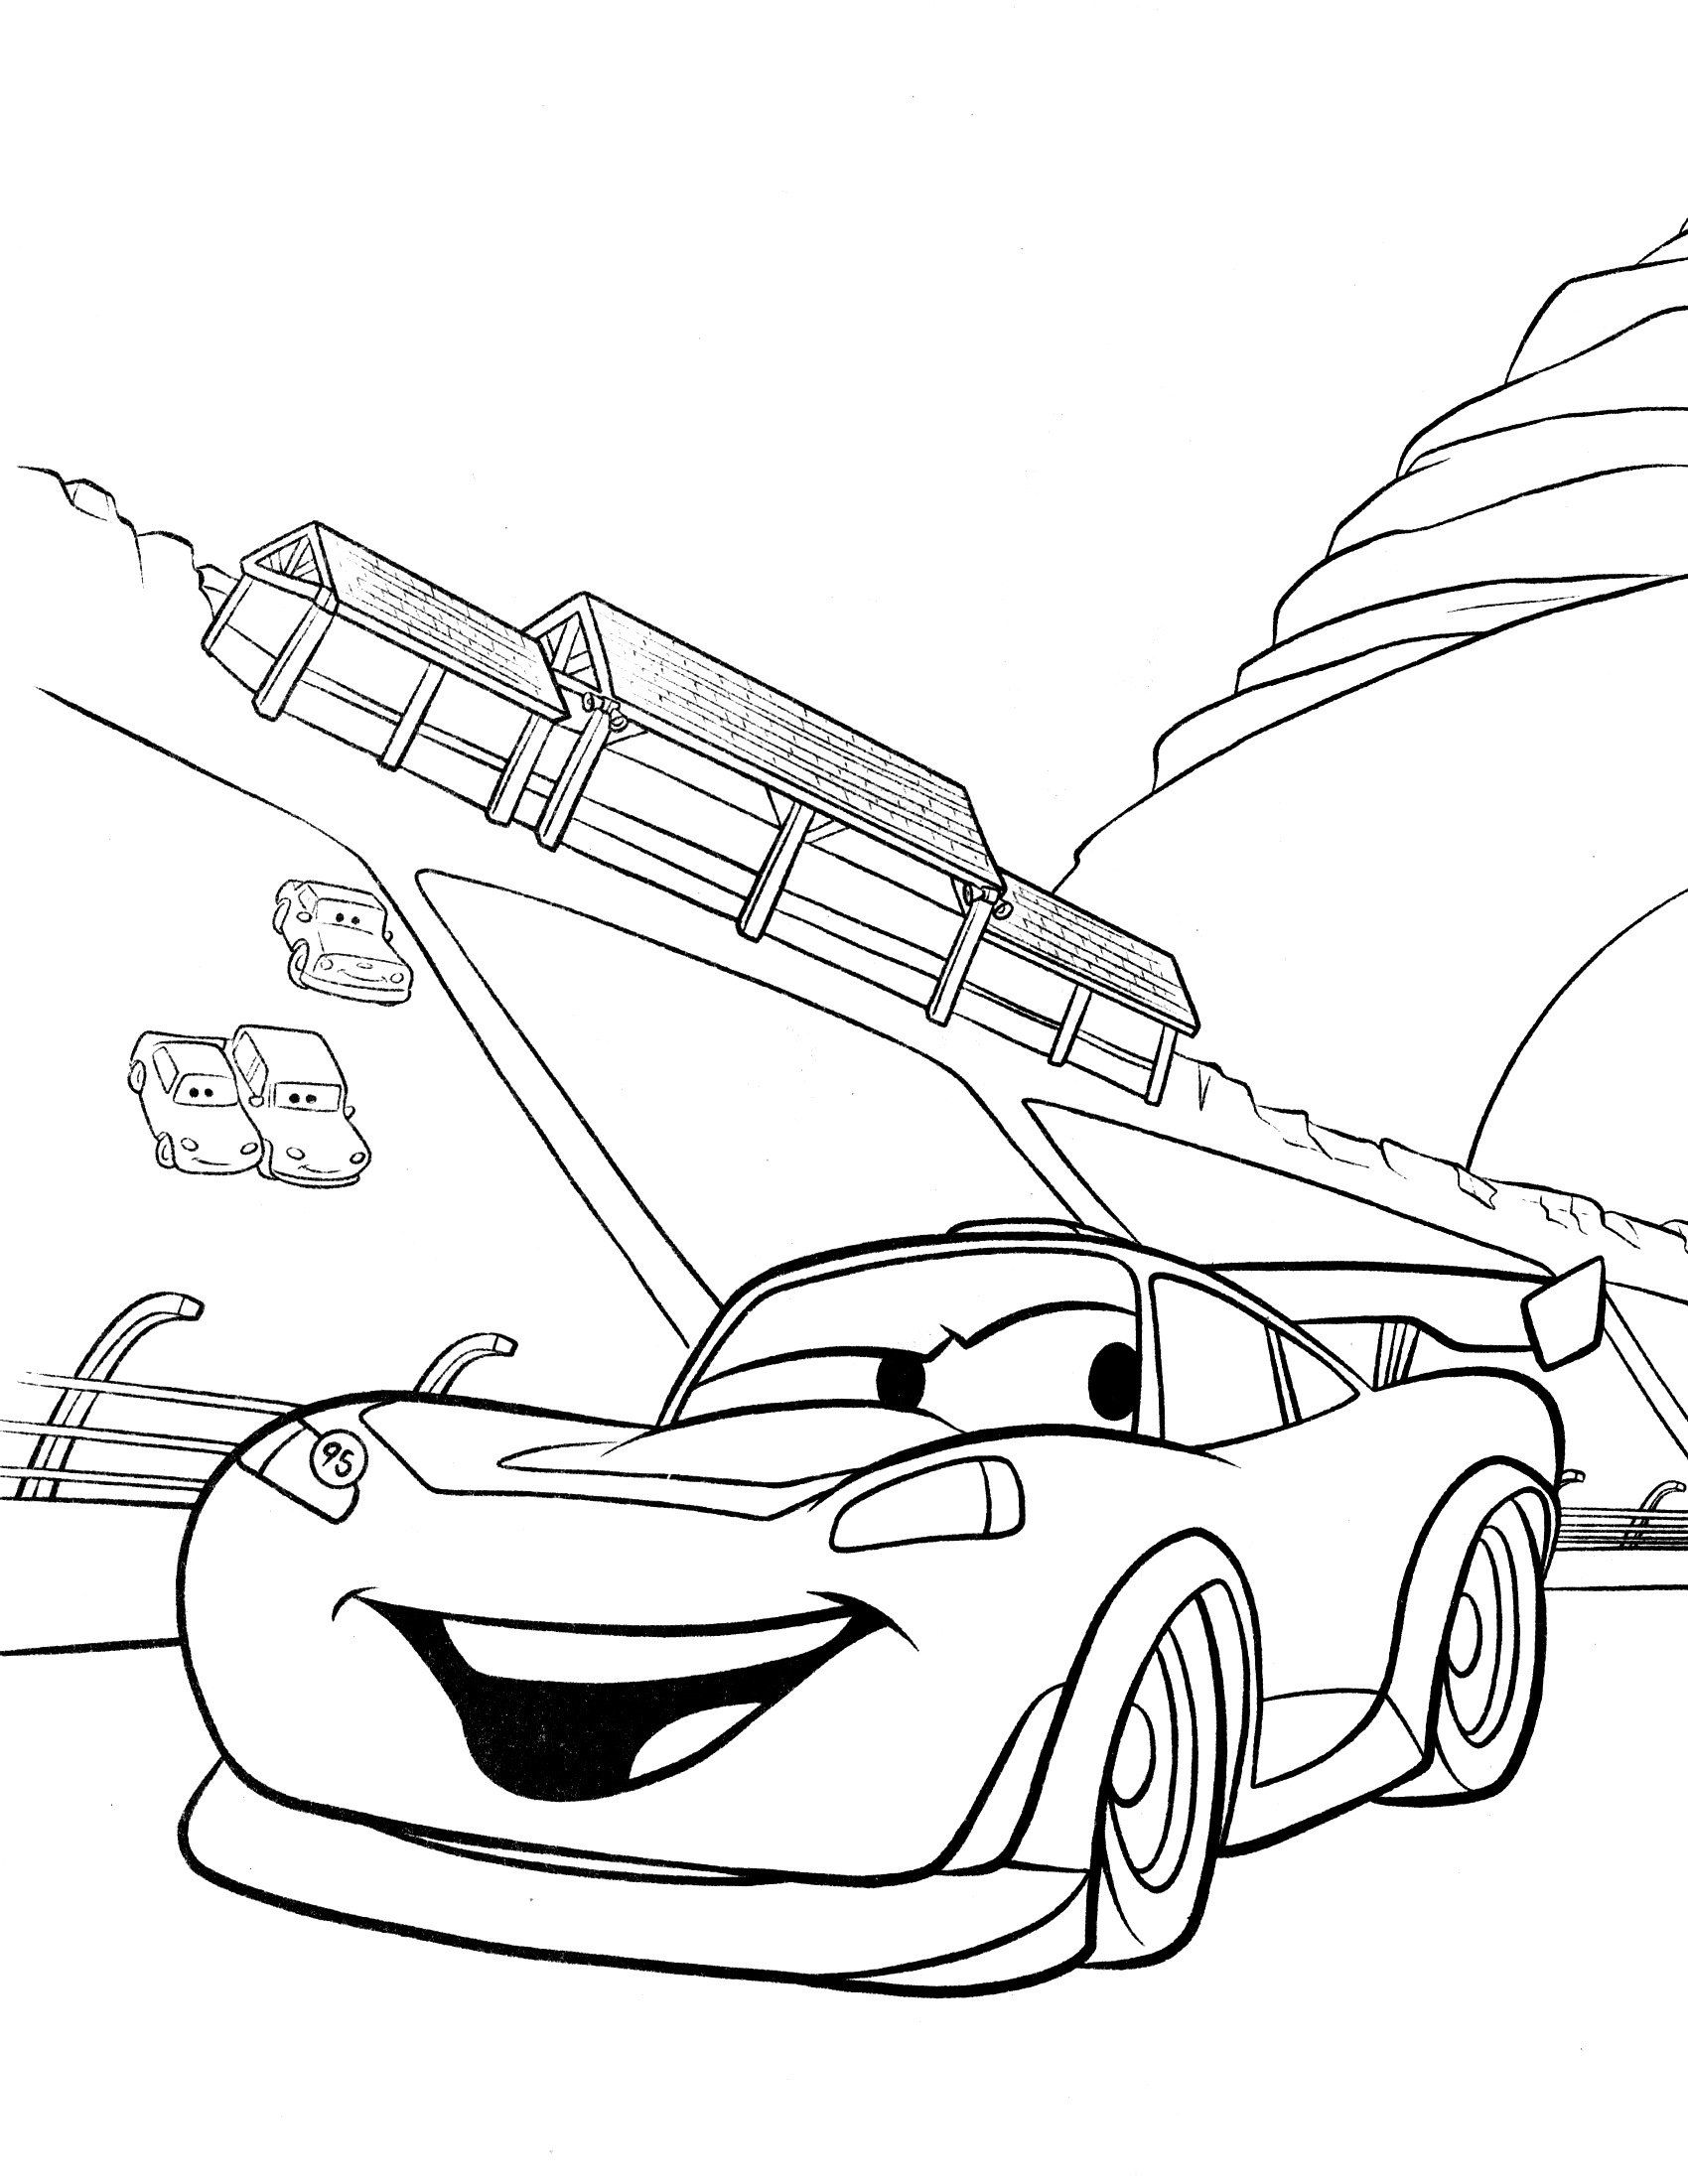 cool-car-coloring-pages-100-original-and-free-2021